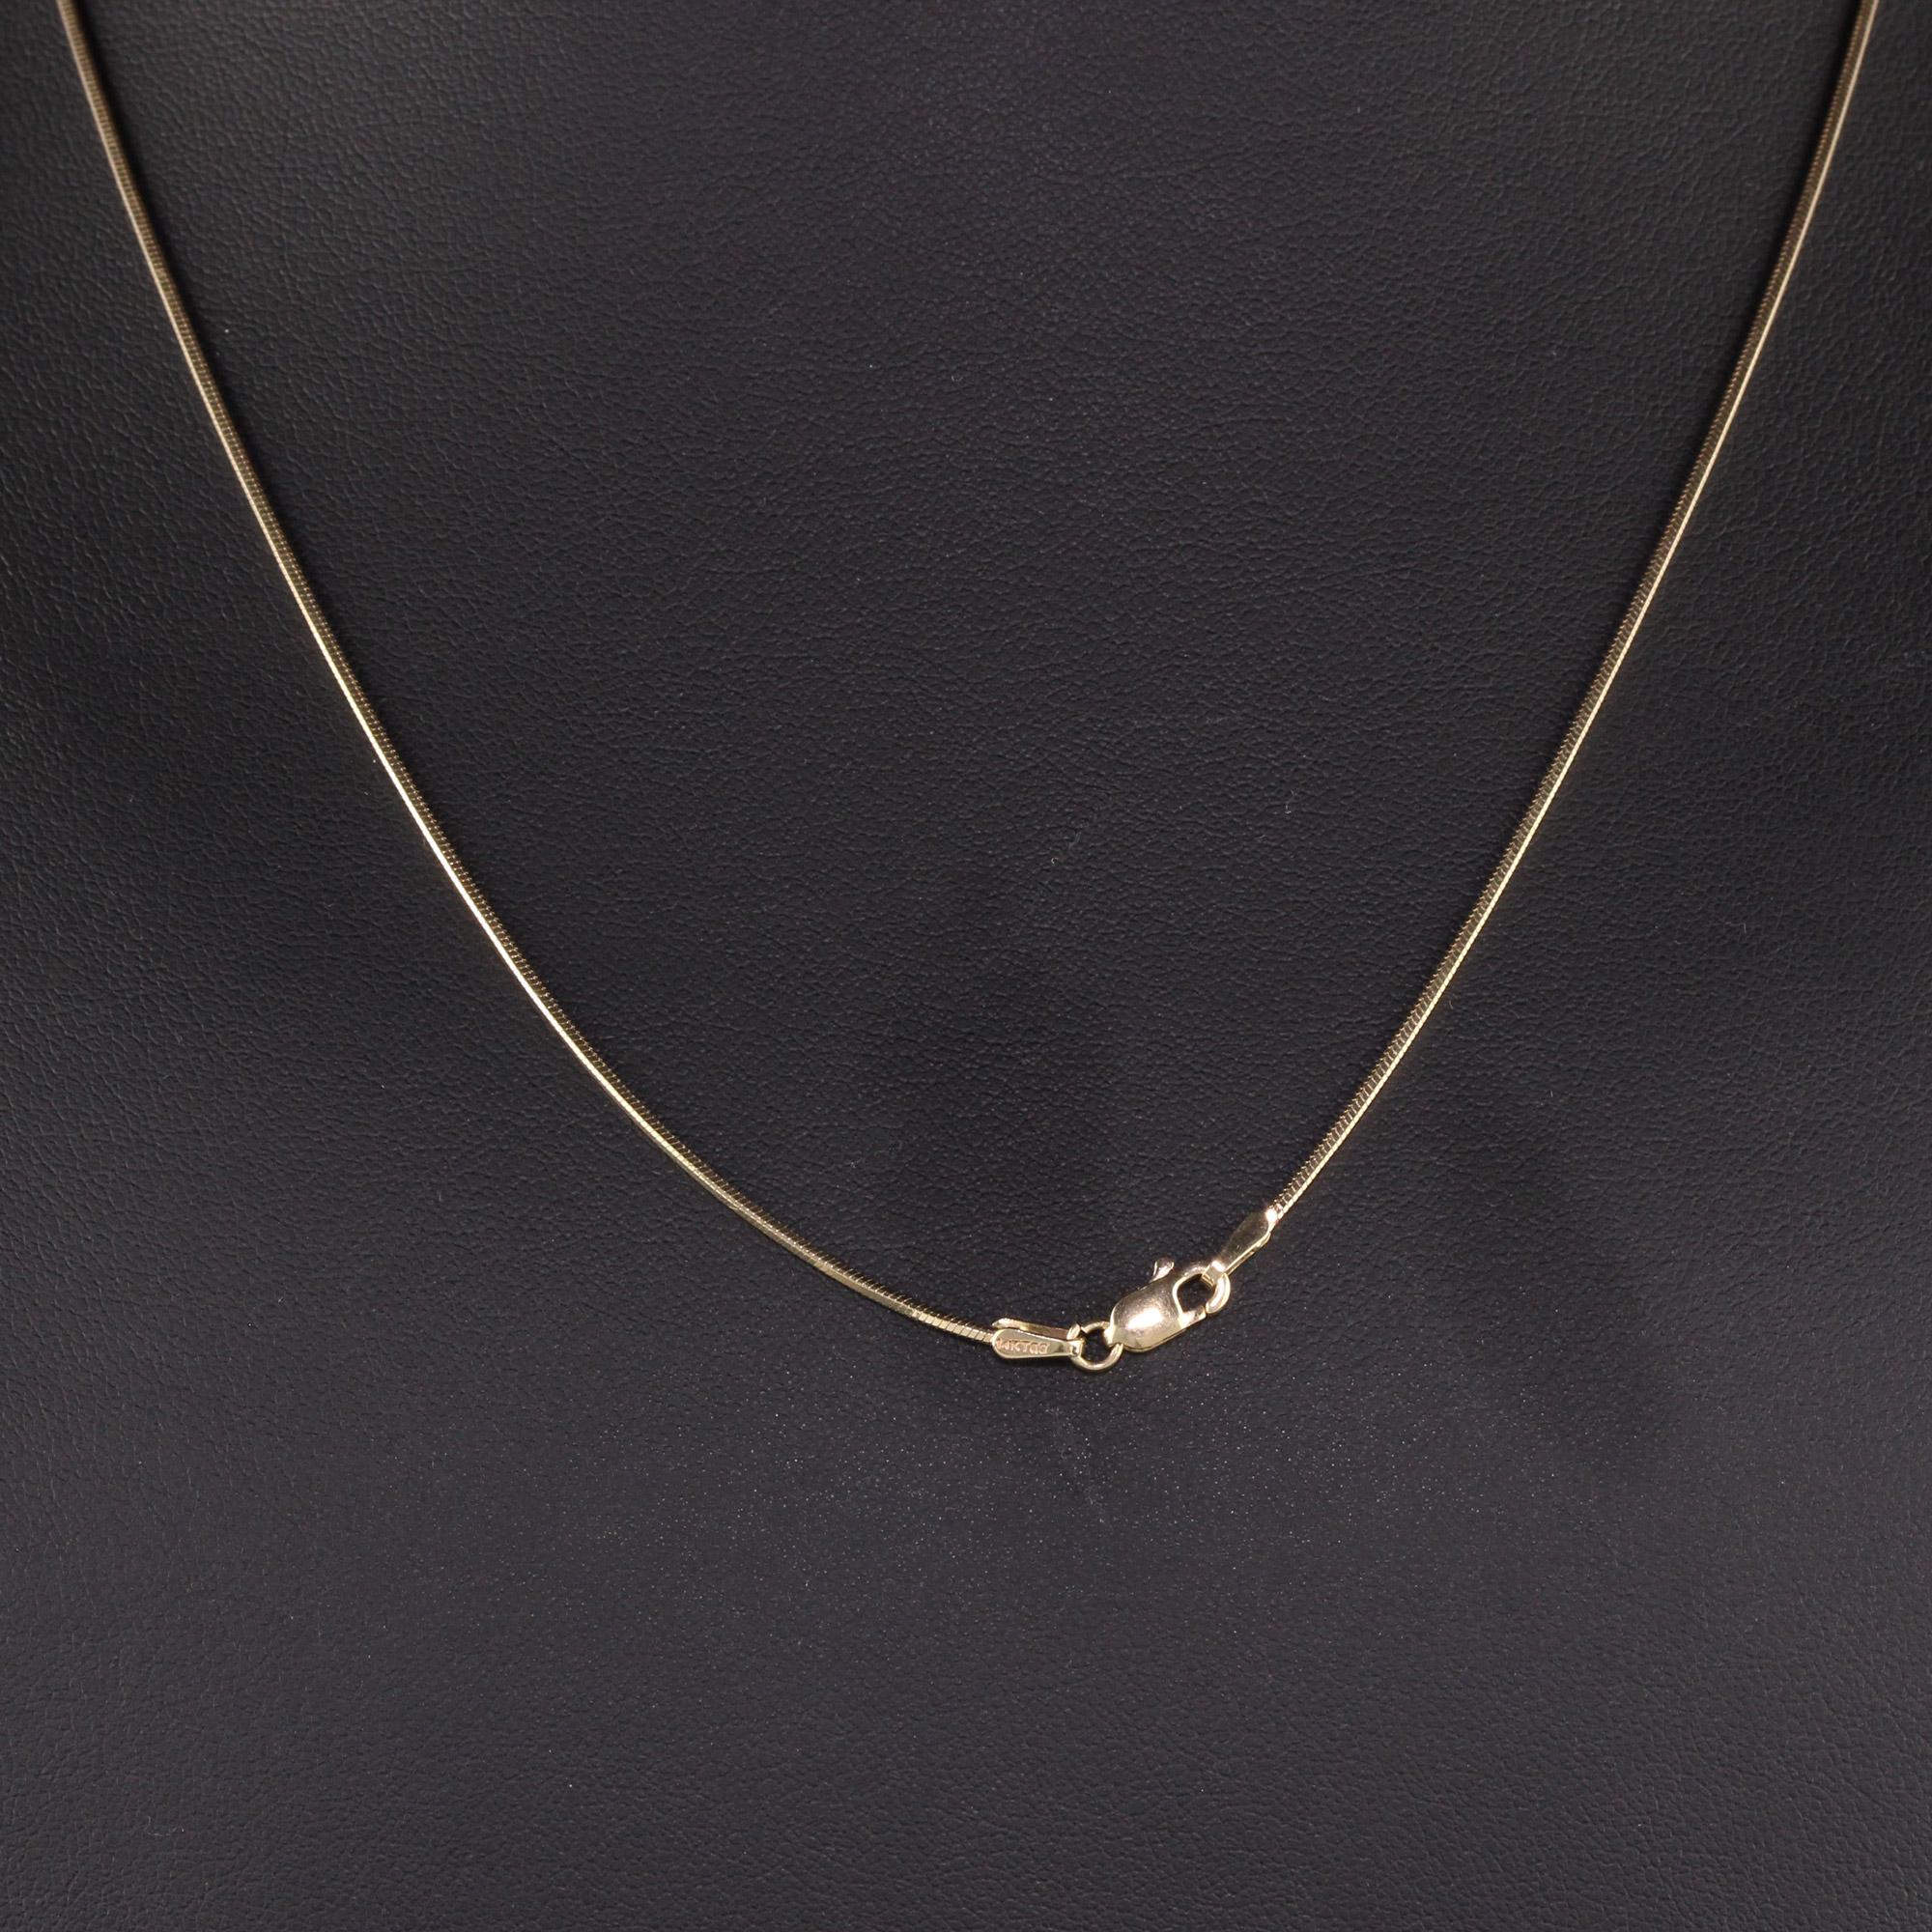 Vintage Estate 14K Yellow Gold Snake Chain, 18 Inches 2